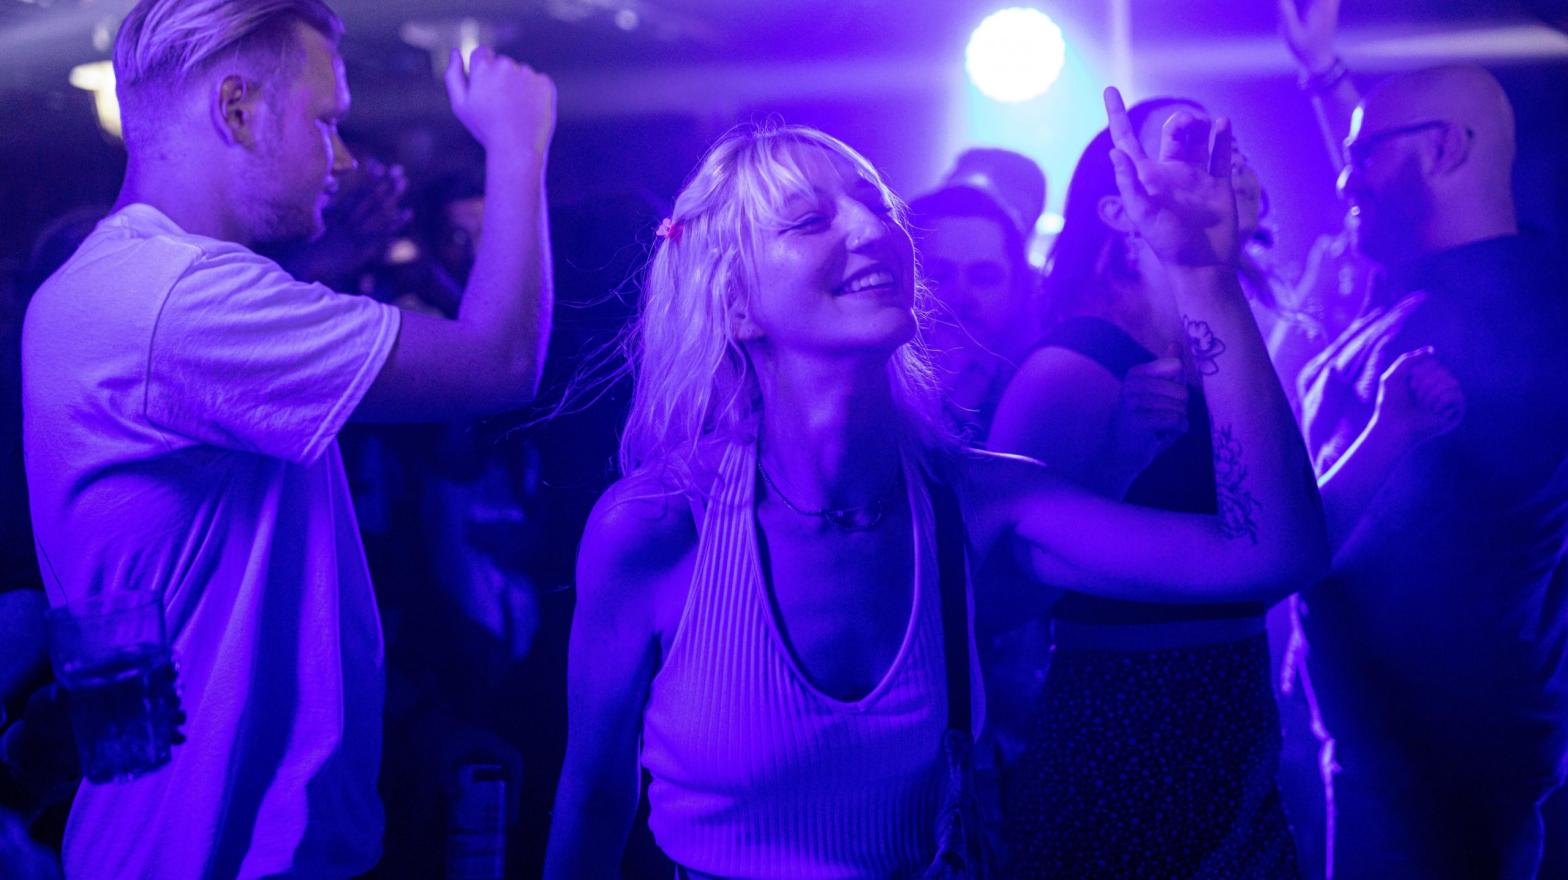 People dancing at Egg London nightclub in the early hours of July 19, 2021 in London, England. (Photo: Rob Pinney, Getty Images)